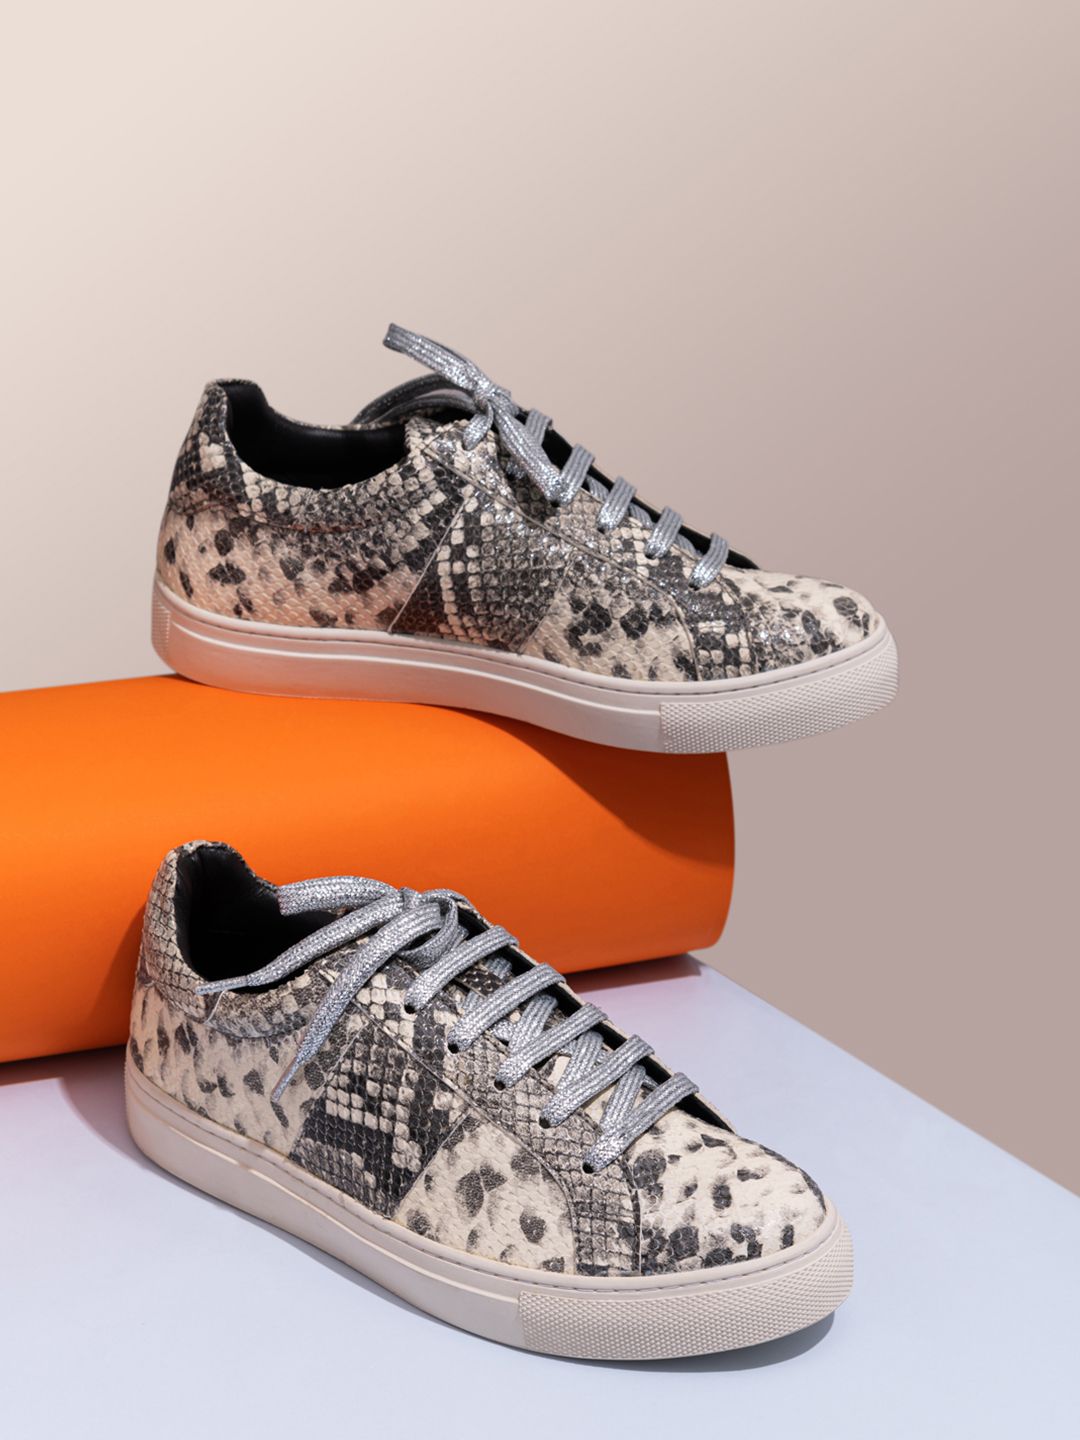 Saint G Women Grey Snakeskin Textured Leather Sneakers Price in India